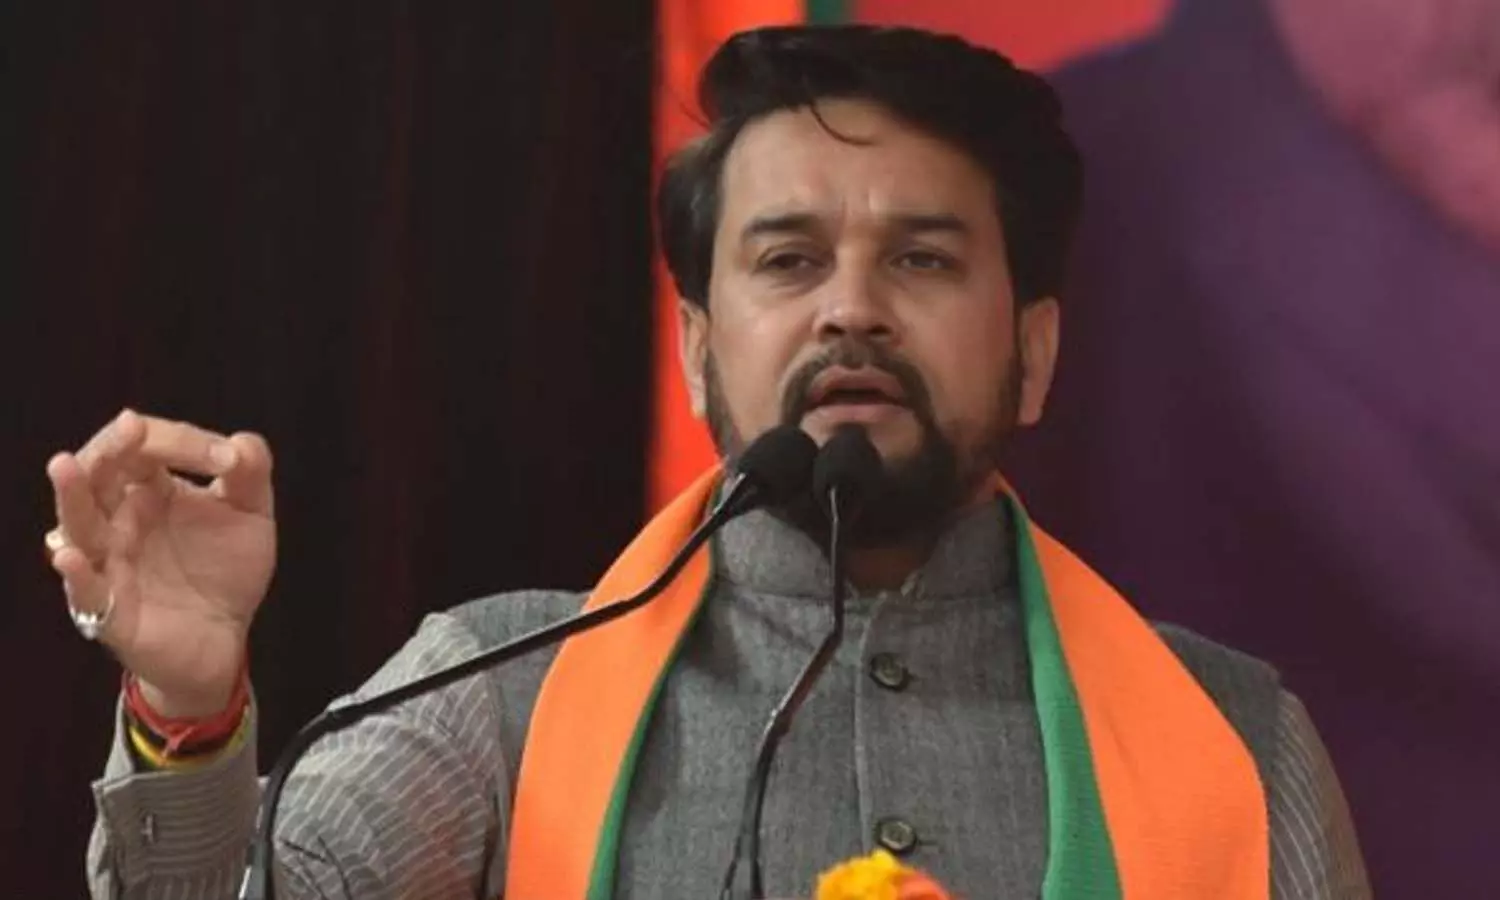 We have accomplished more than 70 years of work in less than 5 years - Anurag Thakur